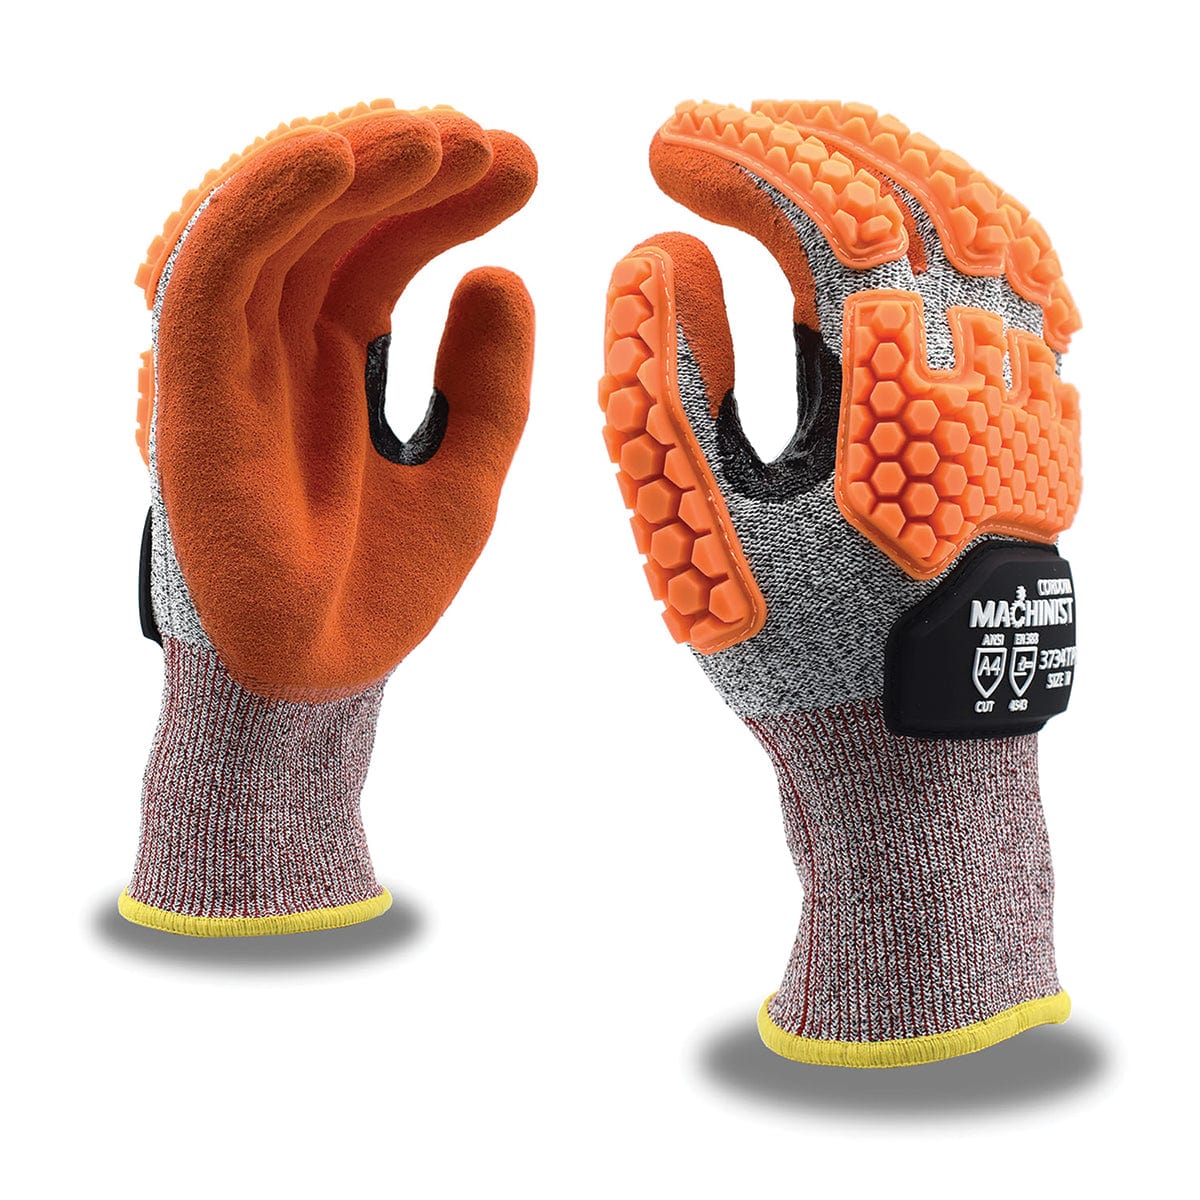 Cordova MACHINIST Impact and Cut Resistant Nitrile Palm Knit Gloves